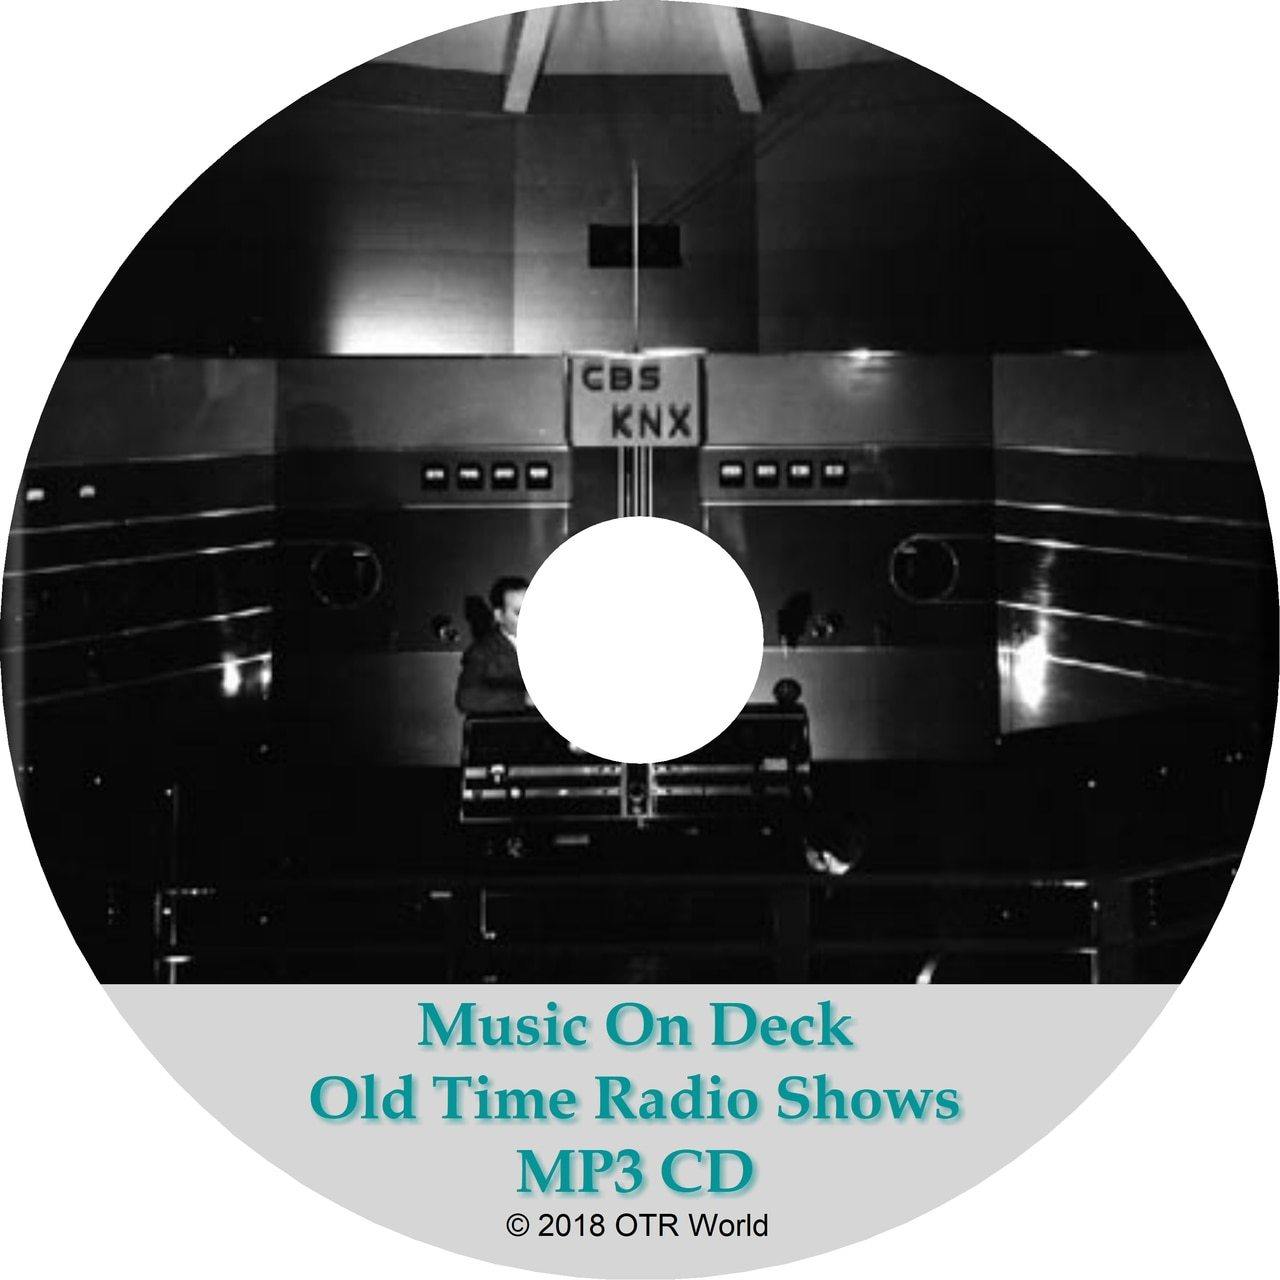 Music On Deck Old Time Radio Shows 3 Episodes On MP3 CD - OTR World